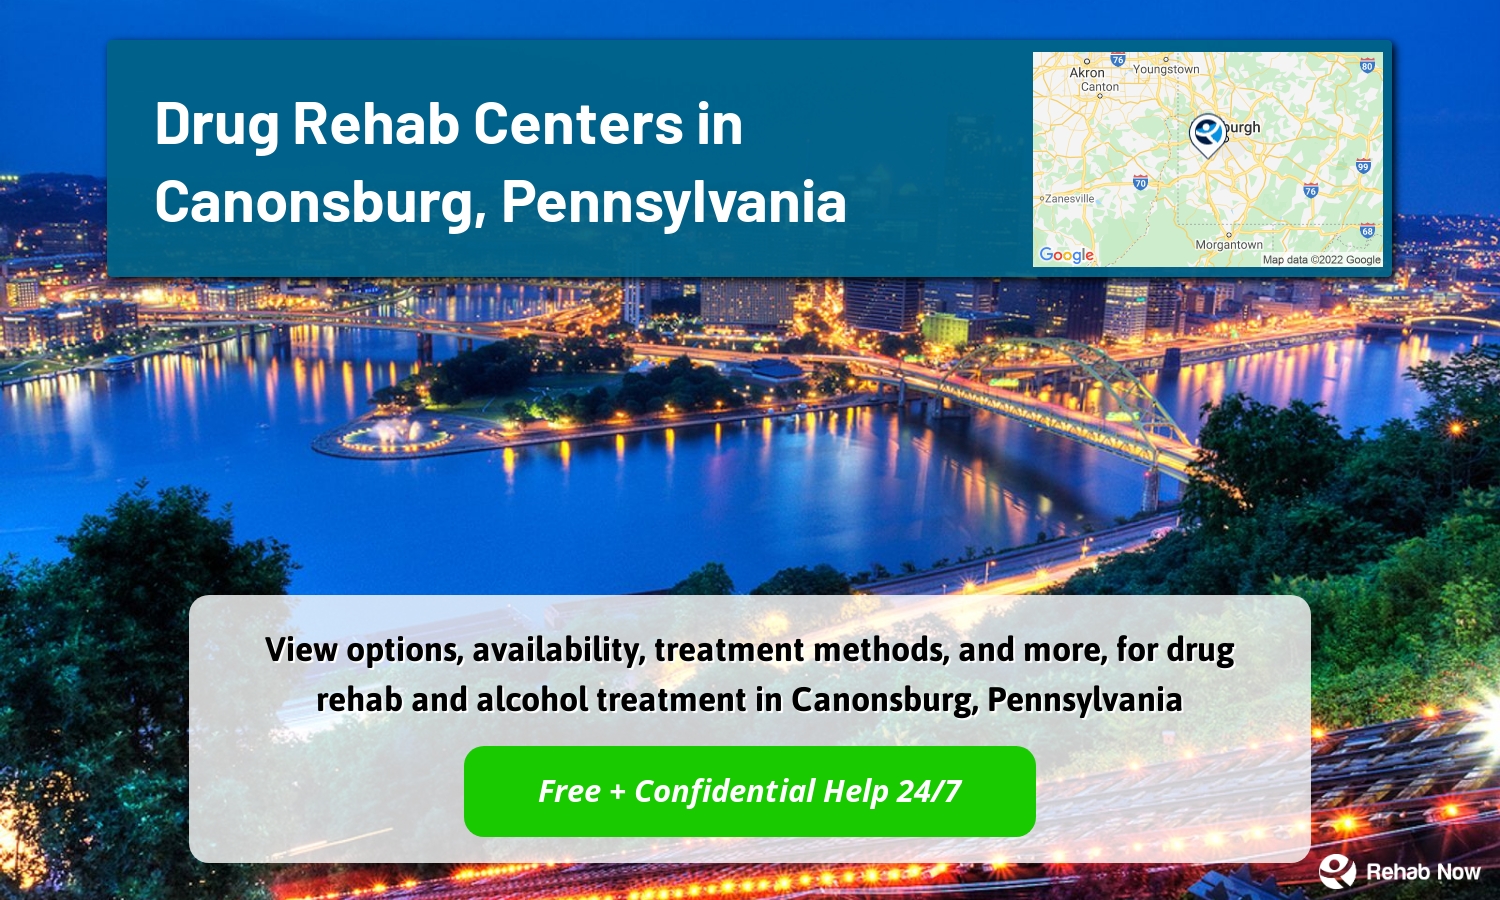 View options, availability, treatment methods, and more, for drug rehab and alcohol treatment in Canonsburg, Pennsylvania